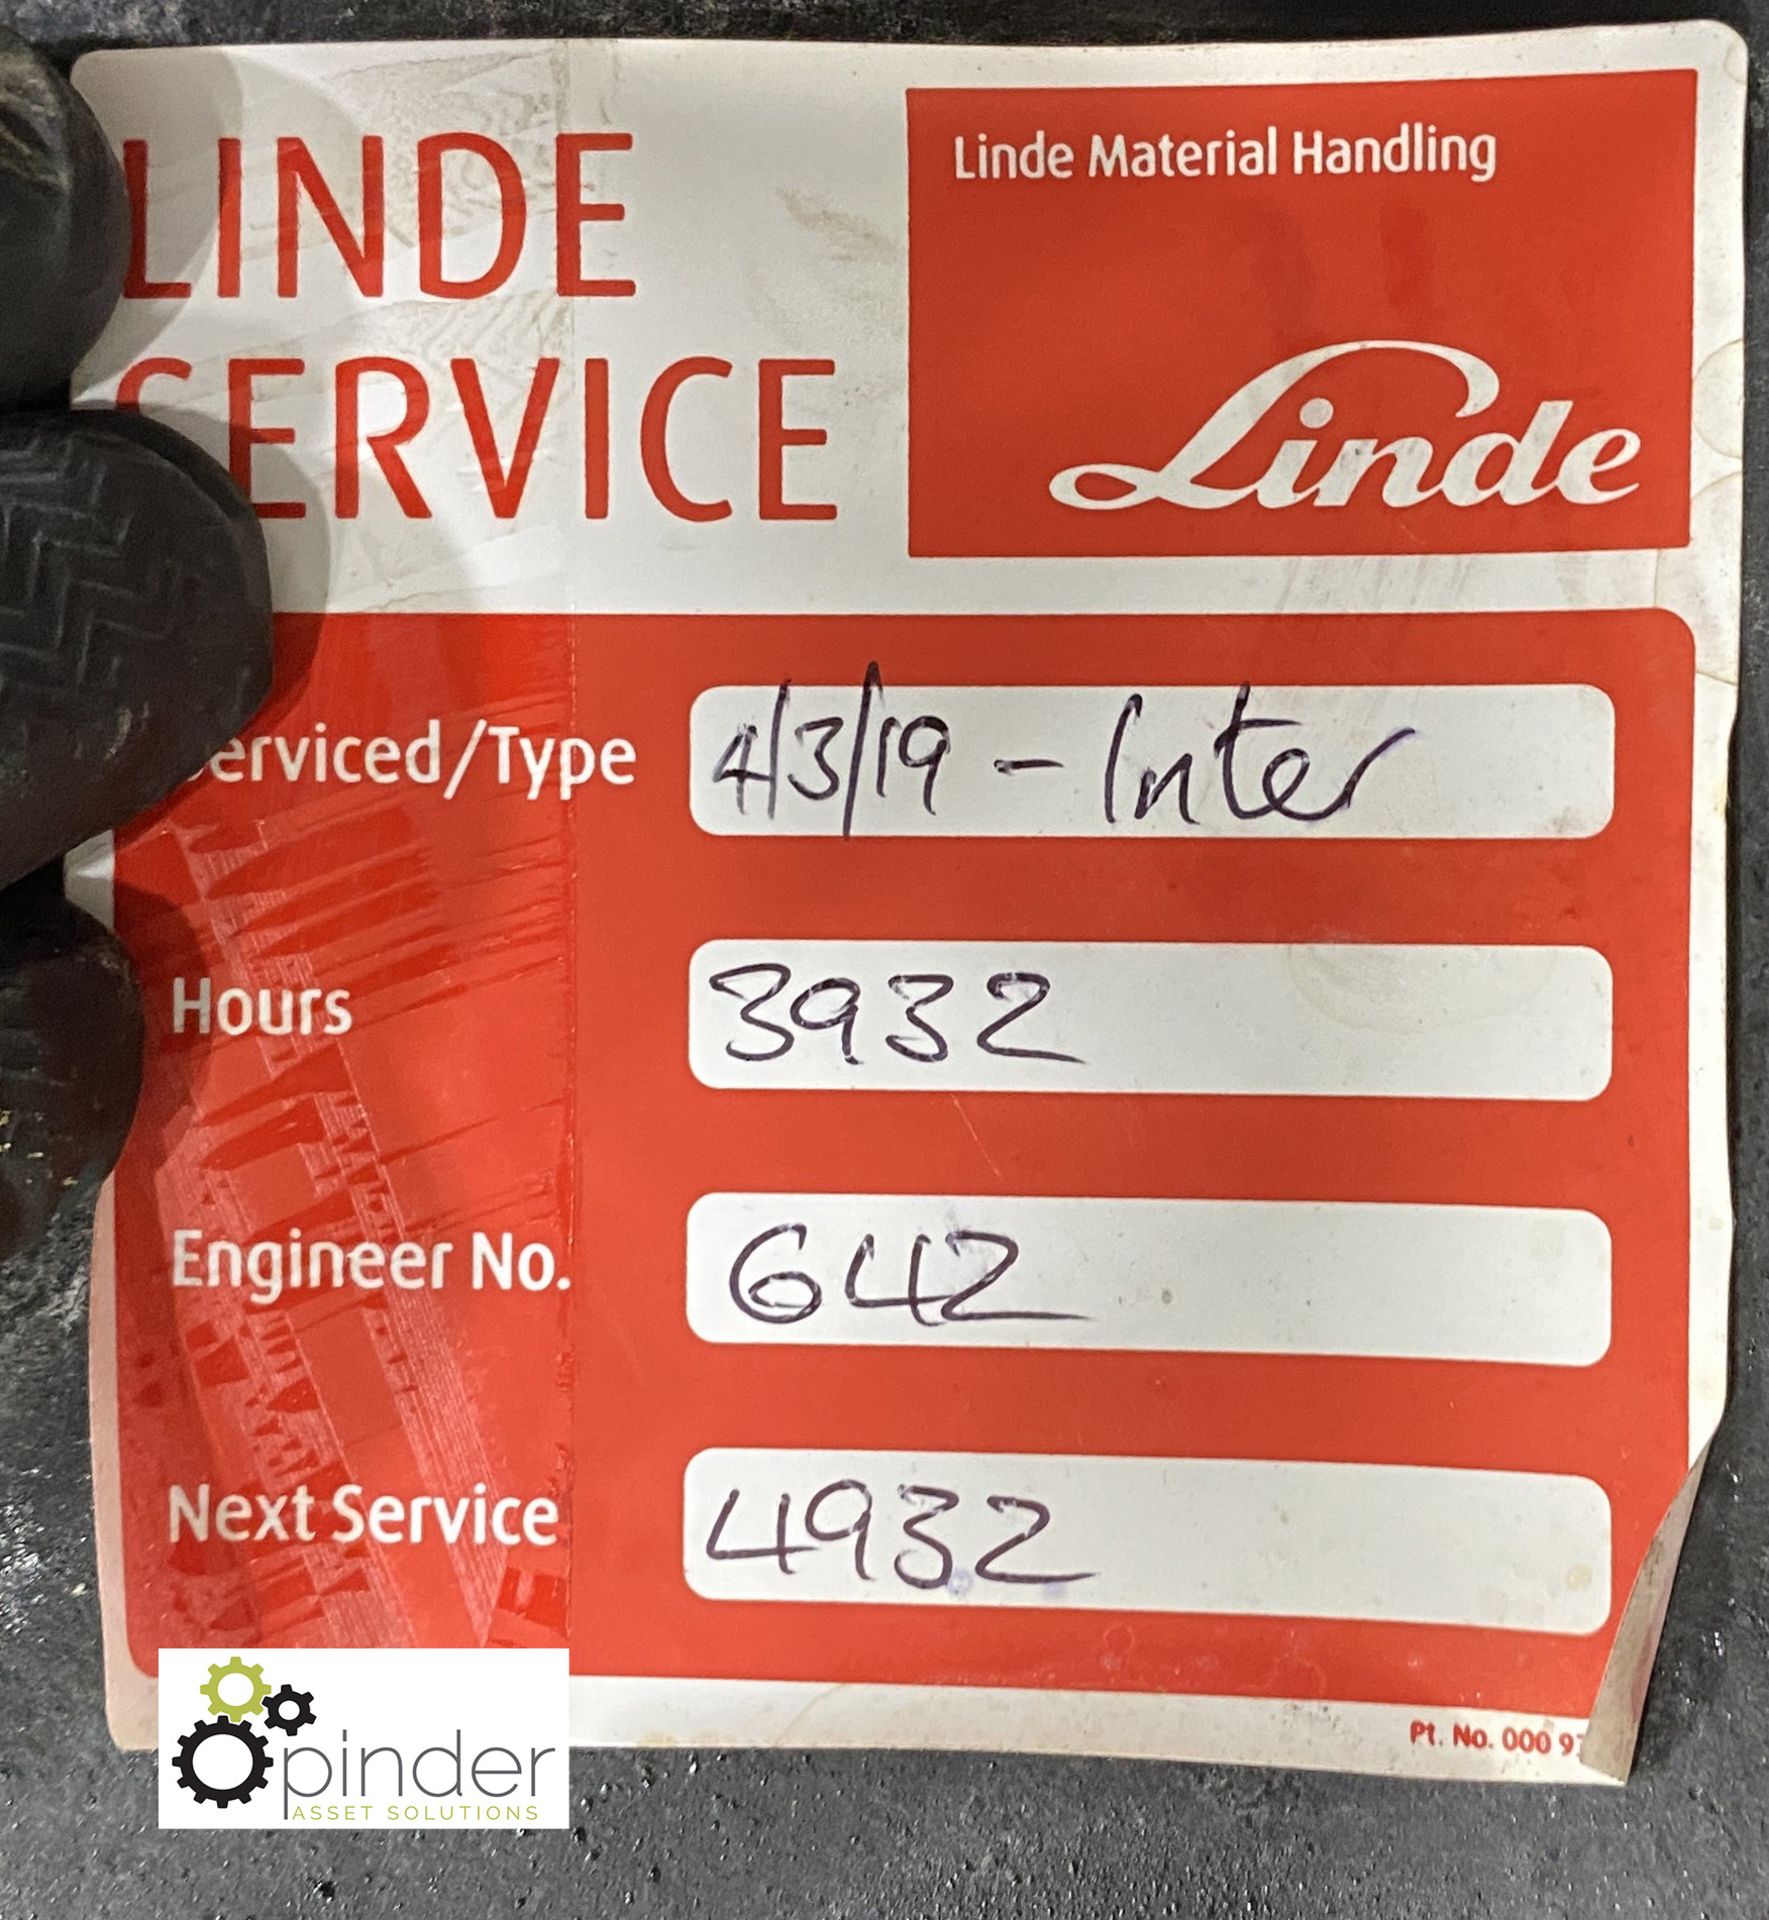 Linde T20 Electric Pedestrian Pallet Truck, 2000kg capacity, 3947hours, with Exide TP24S050S battery - Image 7 of 14